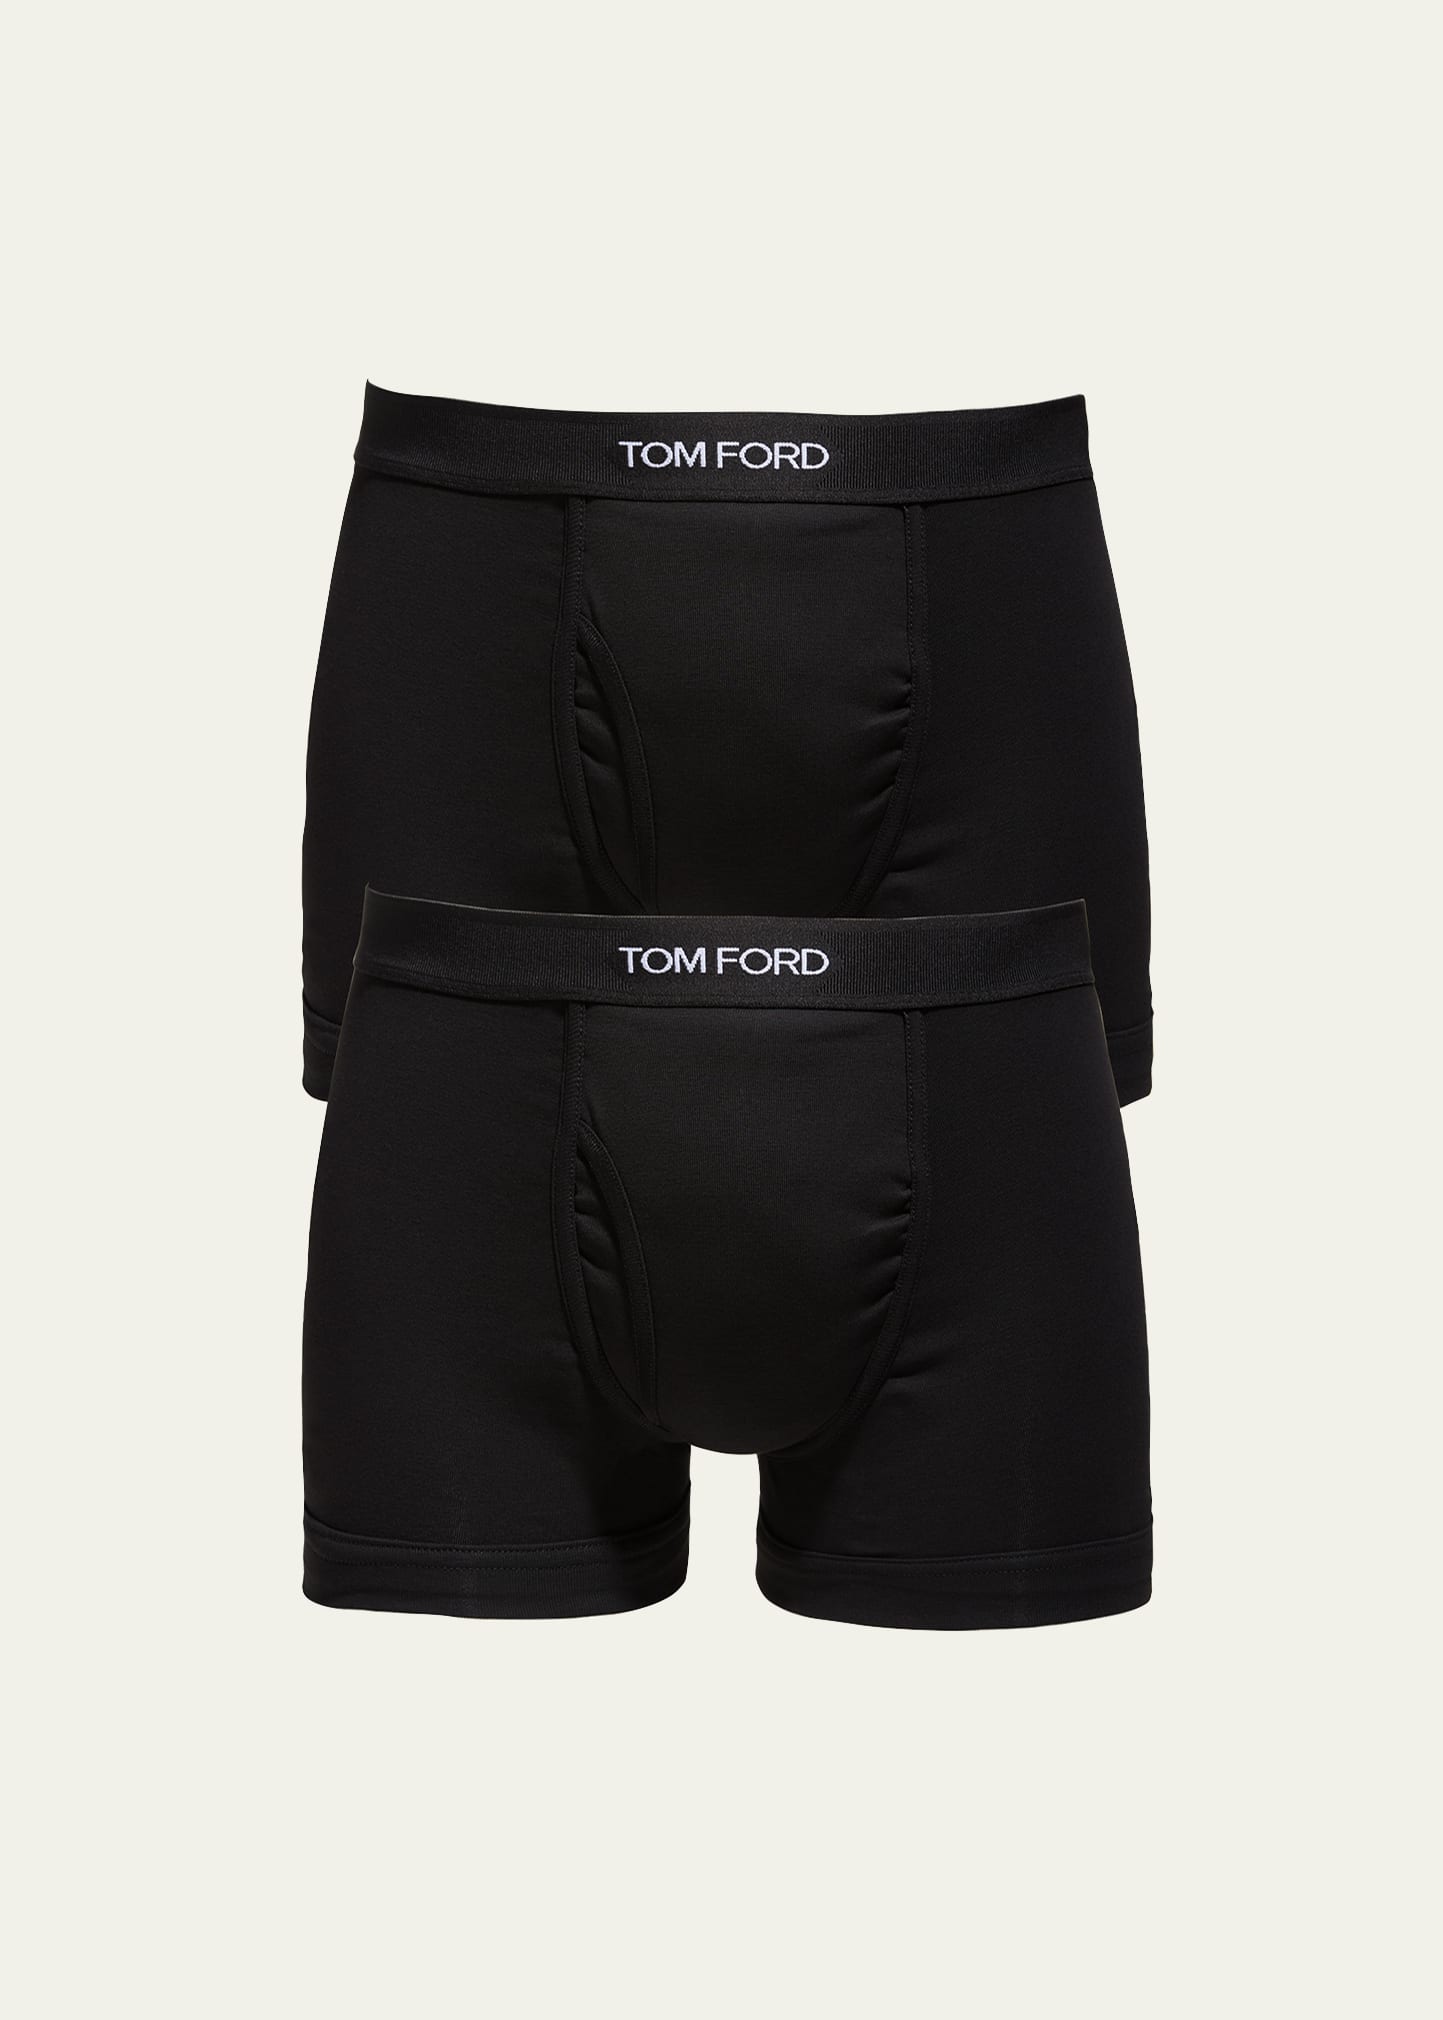 TOM FORD Men's 2-Pack Solid Jersey Boxer Briefs